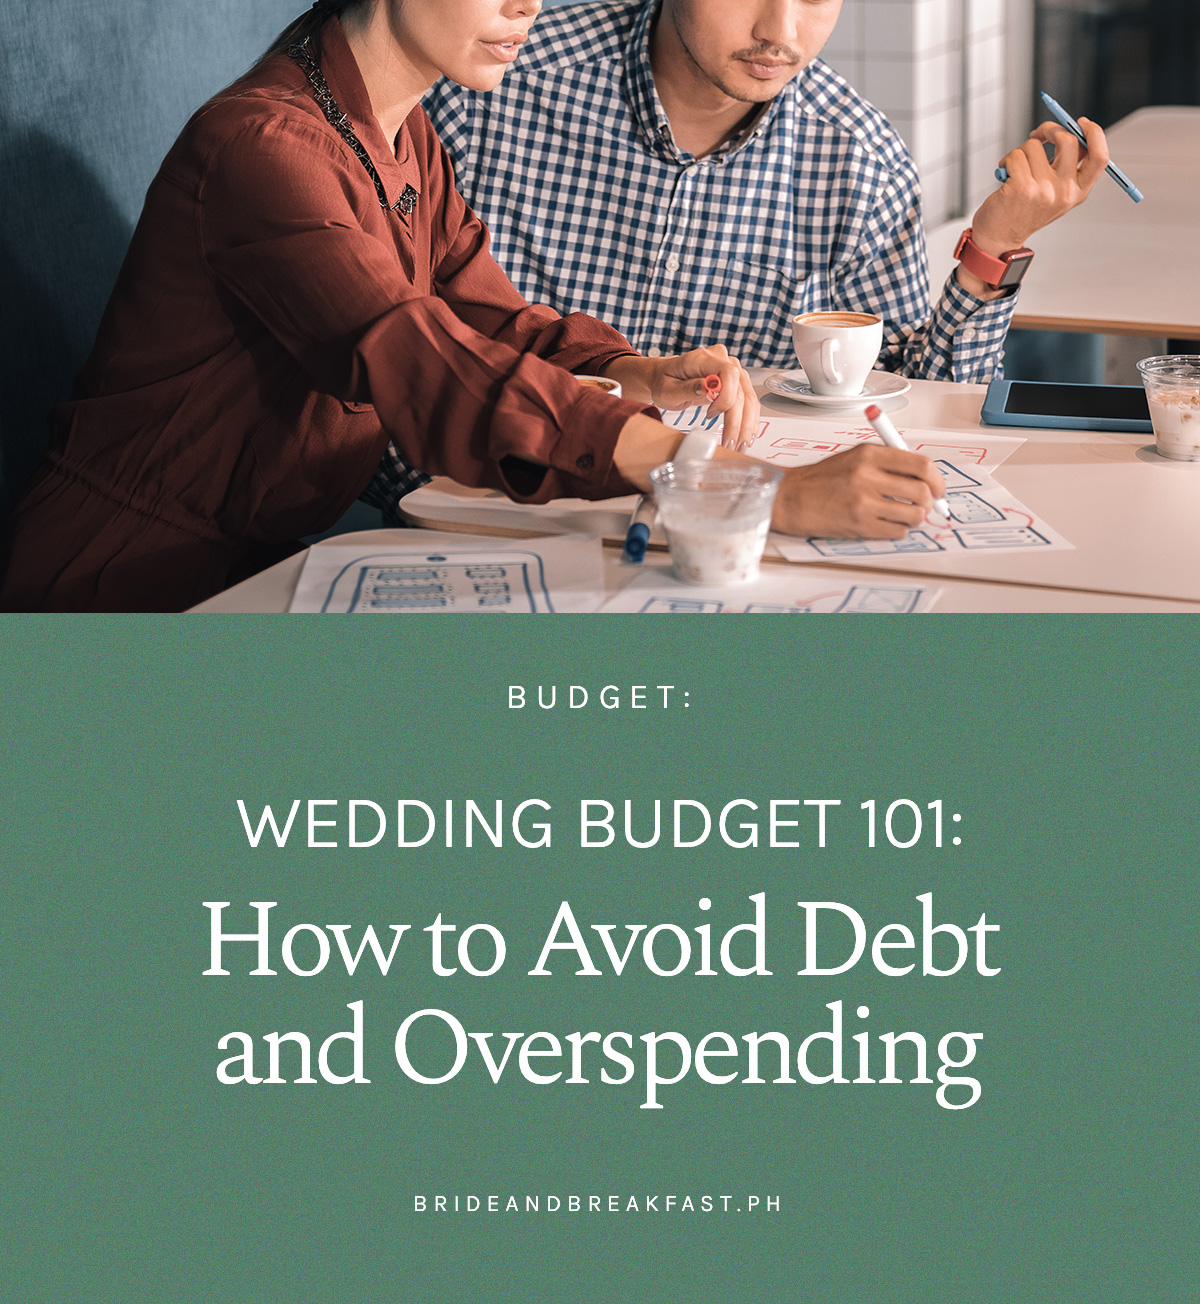 Wedding Budget 101: How to Avoid Debt and Overspending